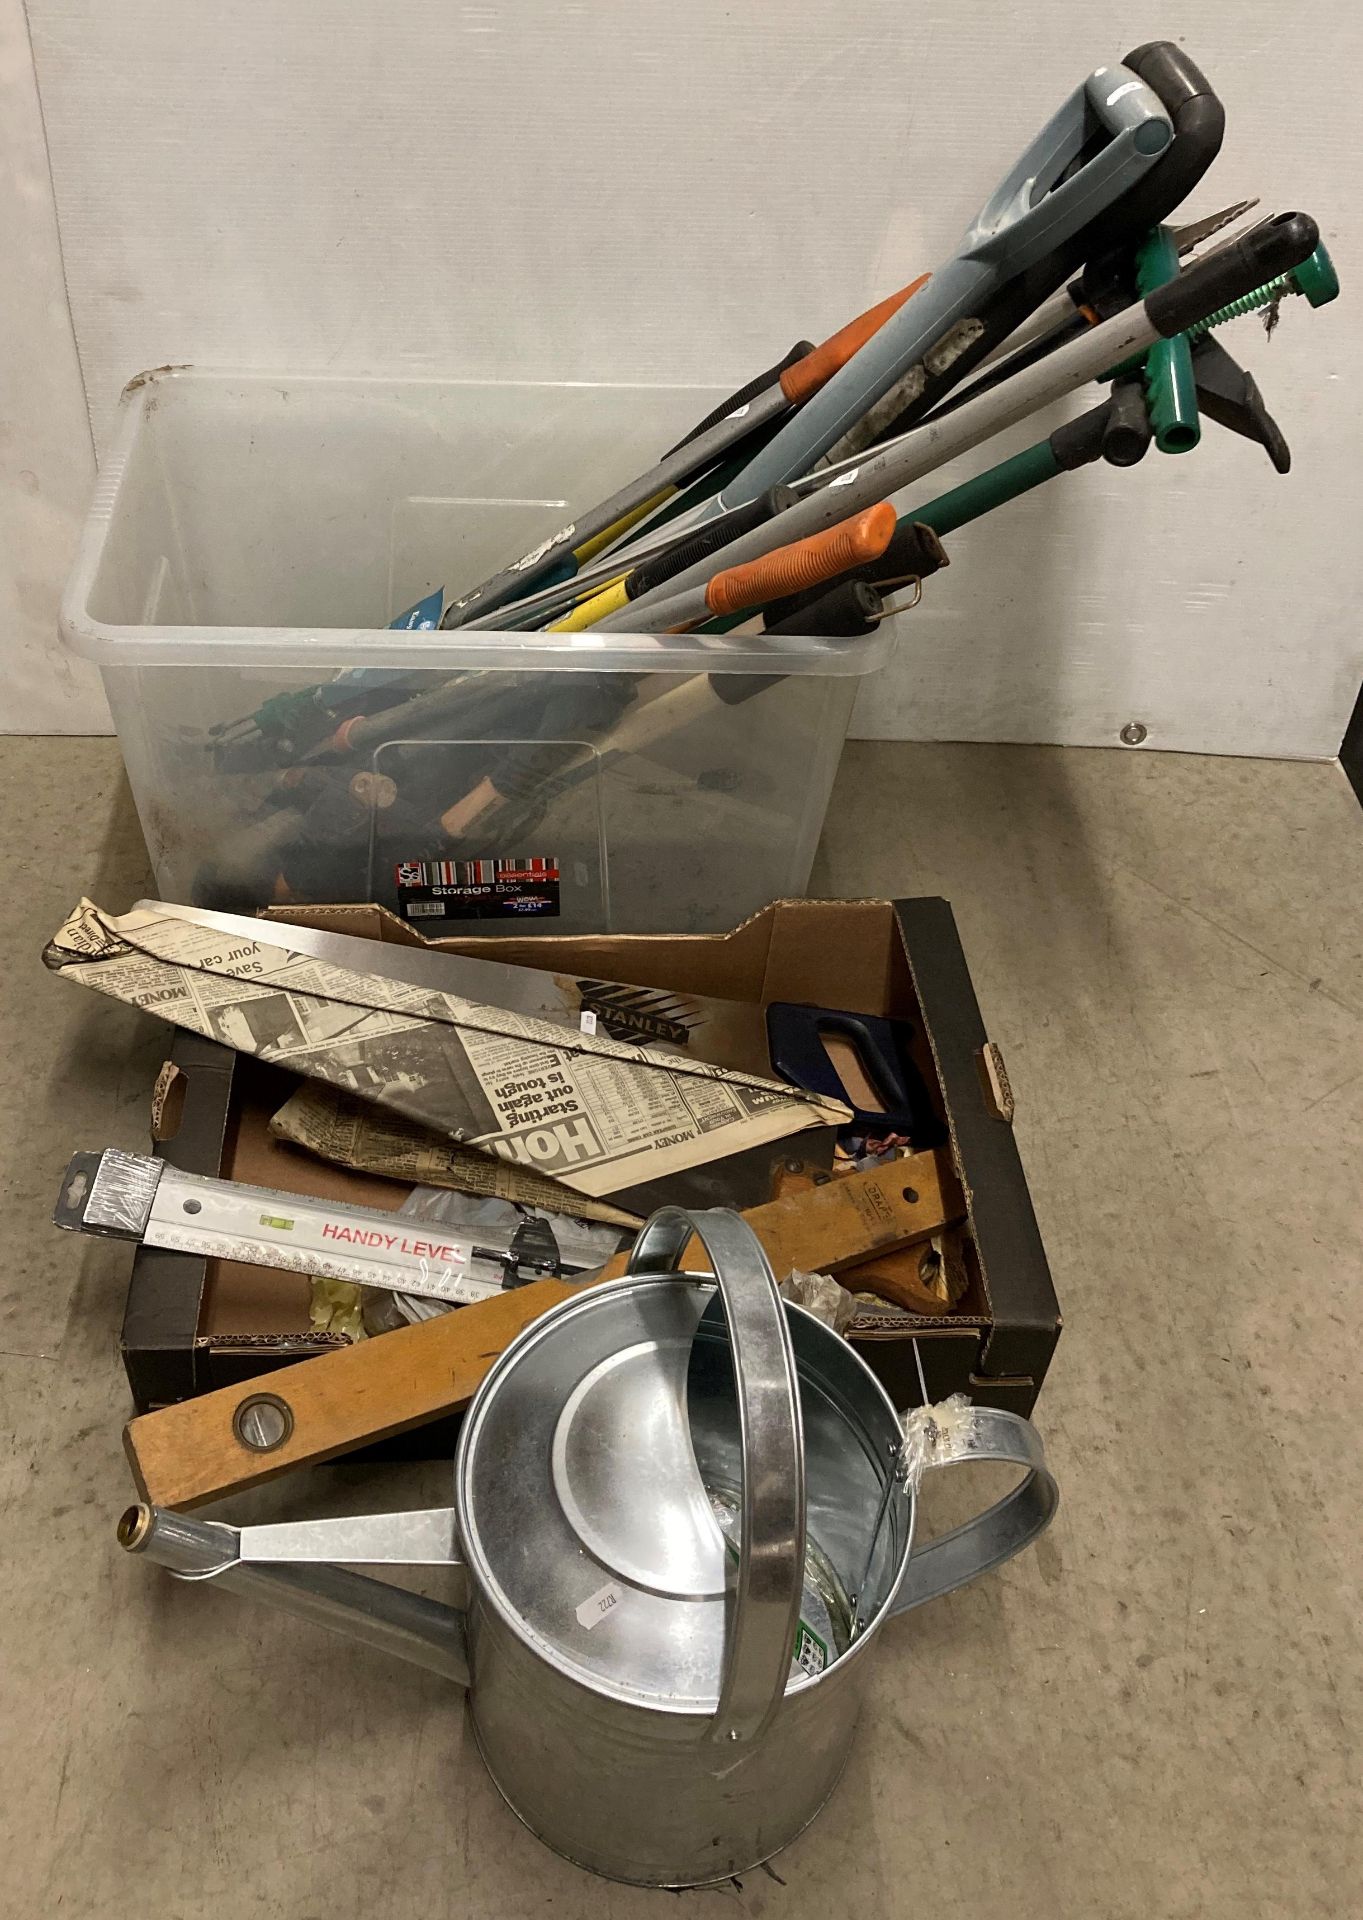 Contents to 2 x boxes - assorted hand tools, gardening tools,